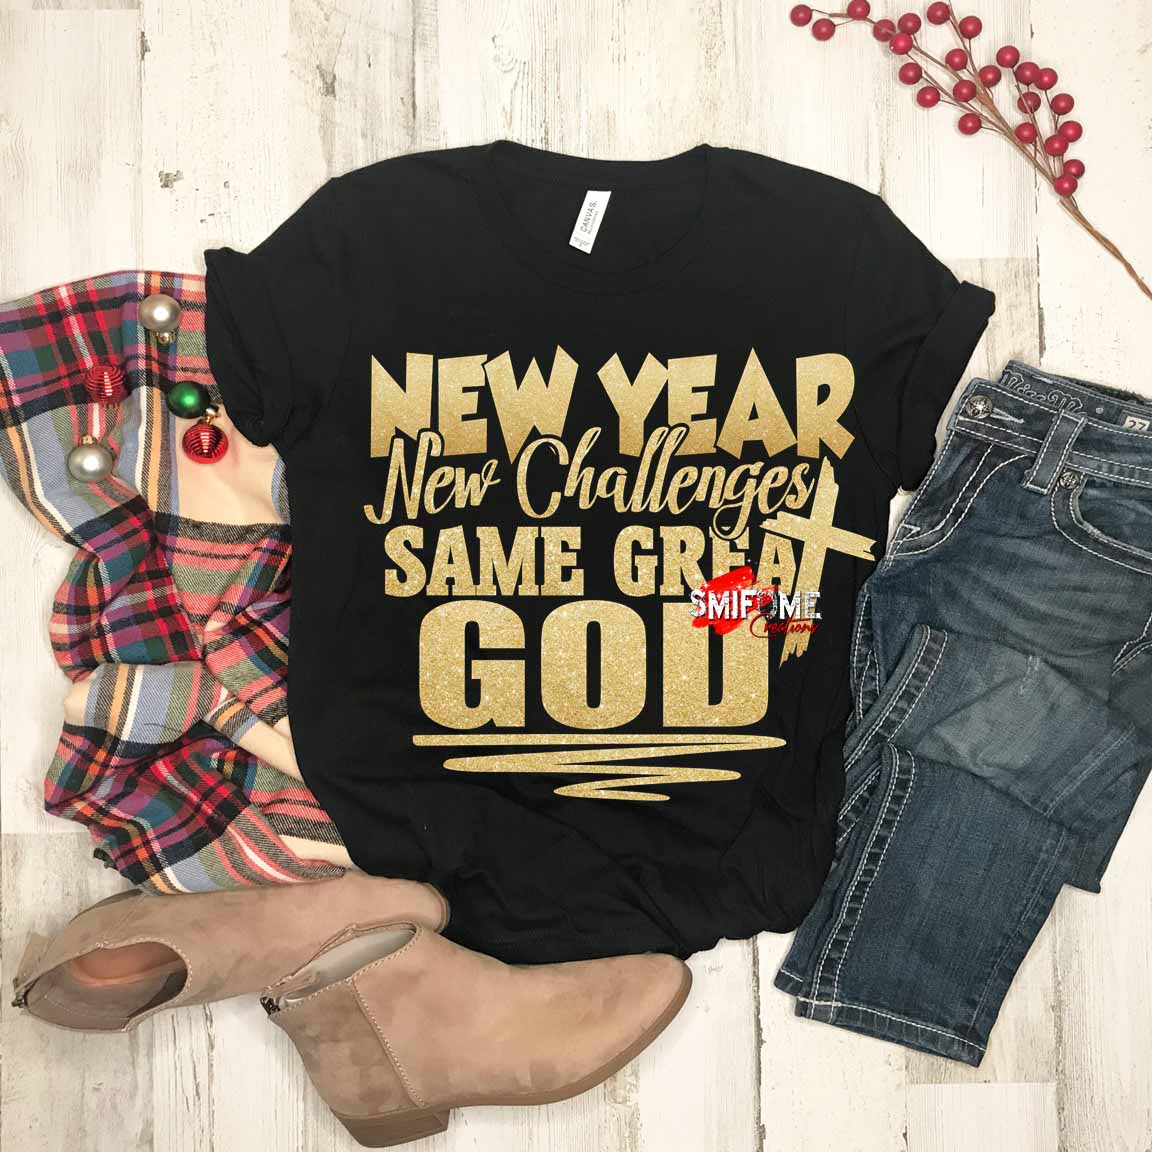 New Year T-Shirt - New Challenges - Same Great God